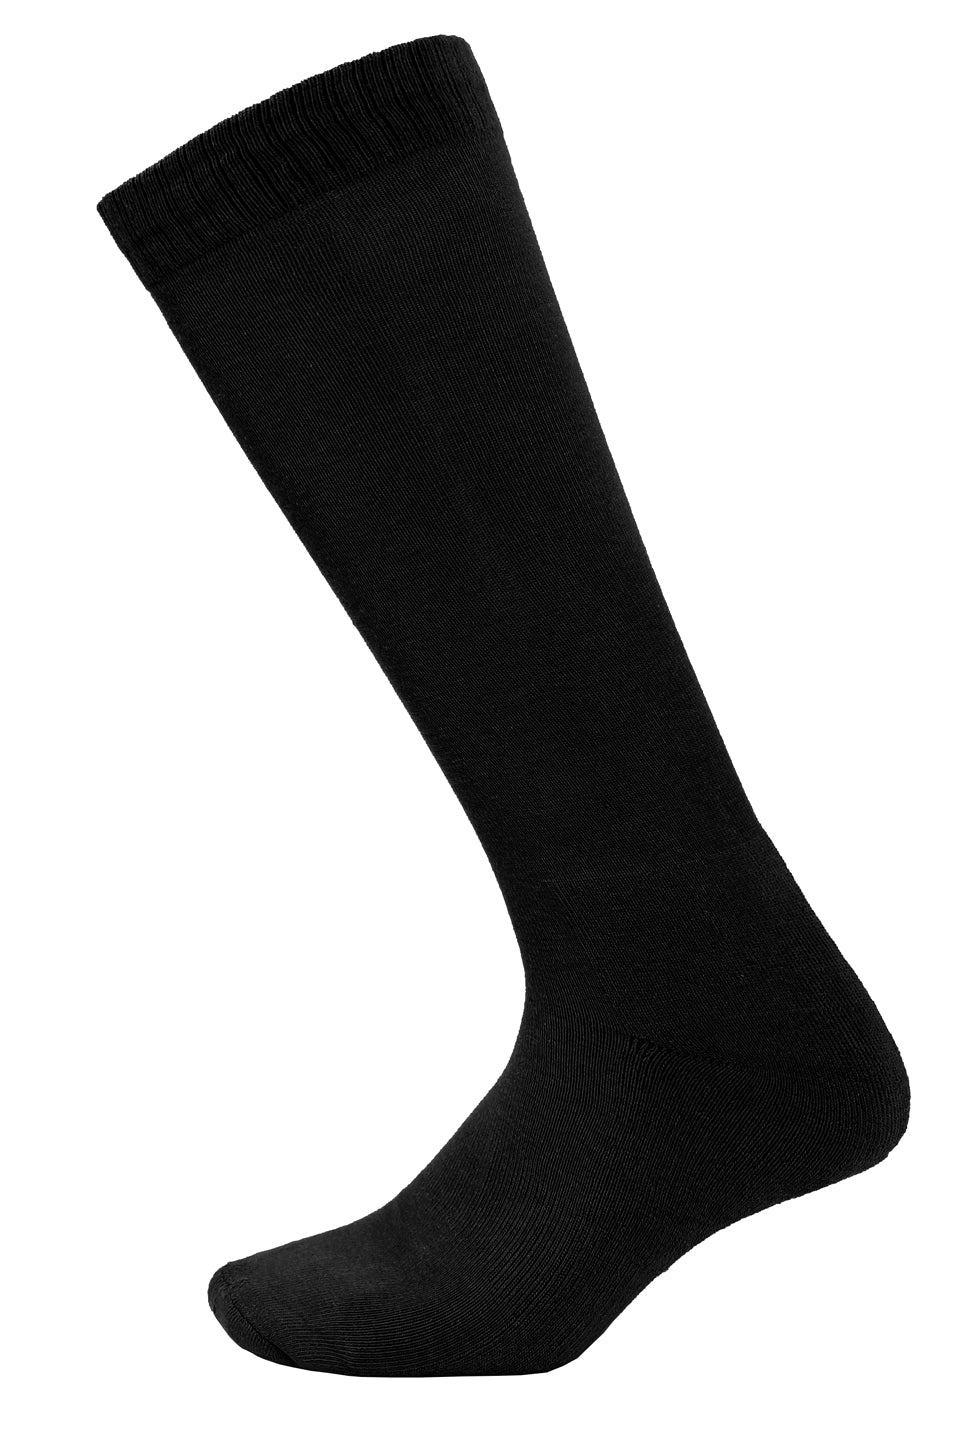 Rothco Moisture Wicking Sock - Tactical Choice Plus